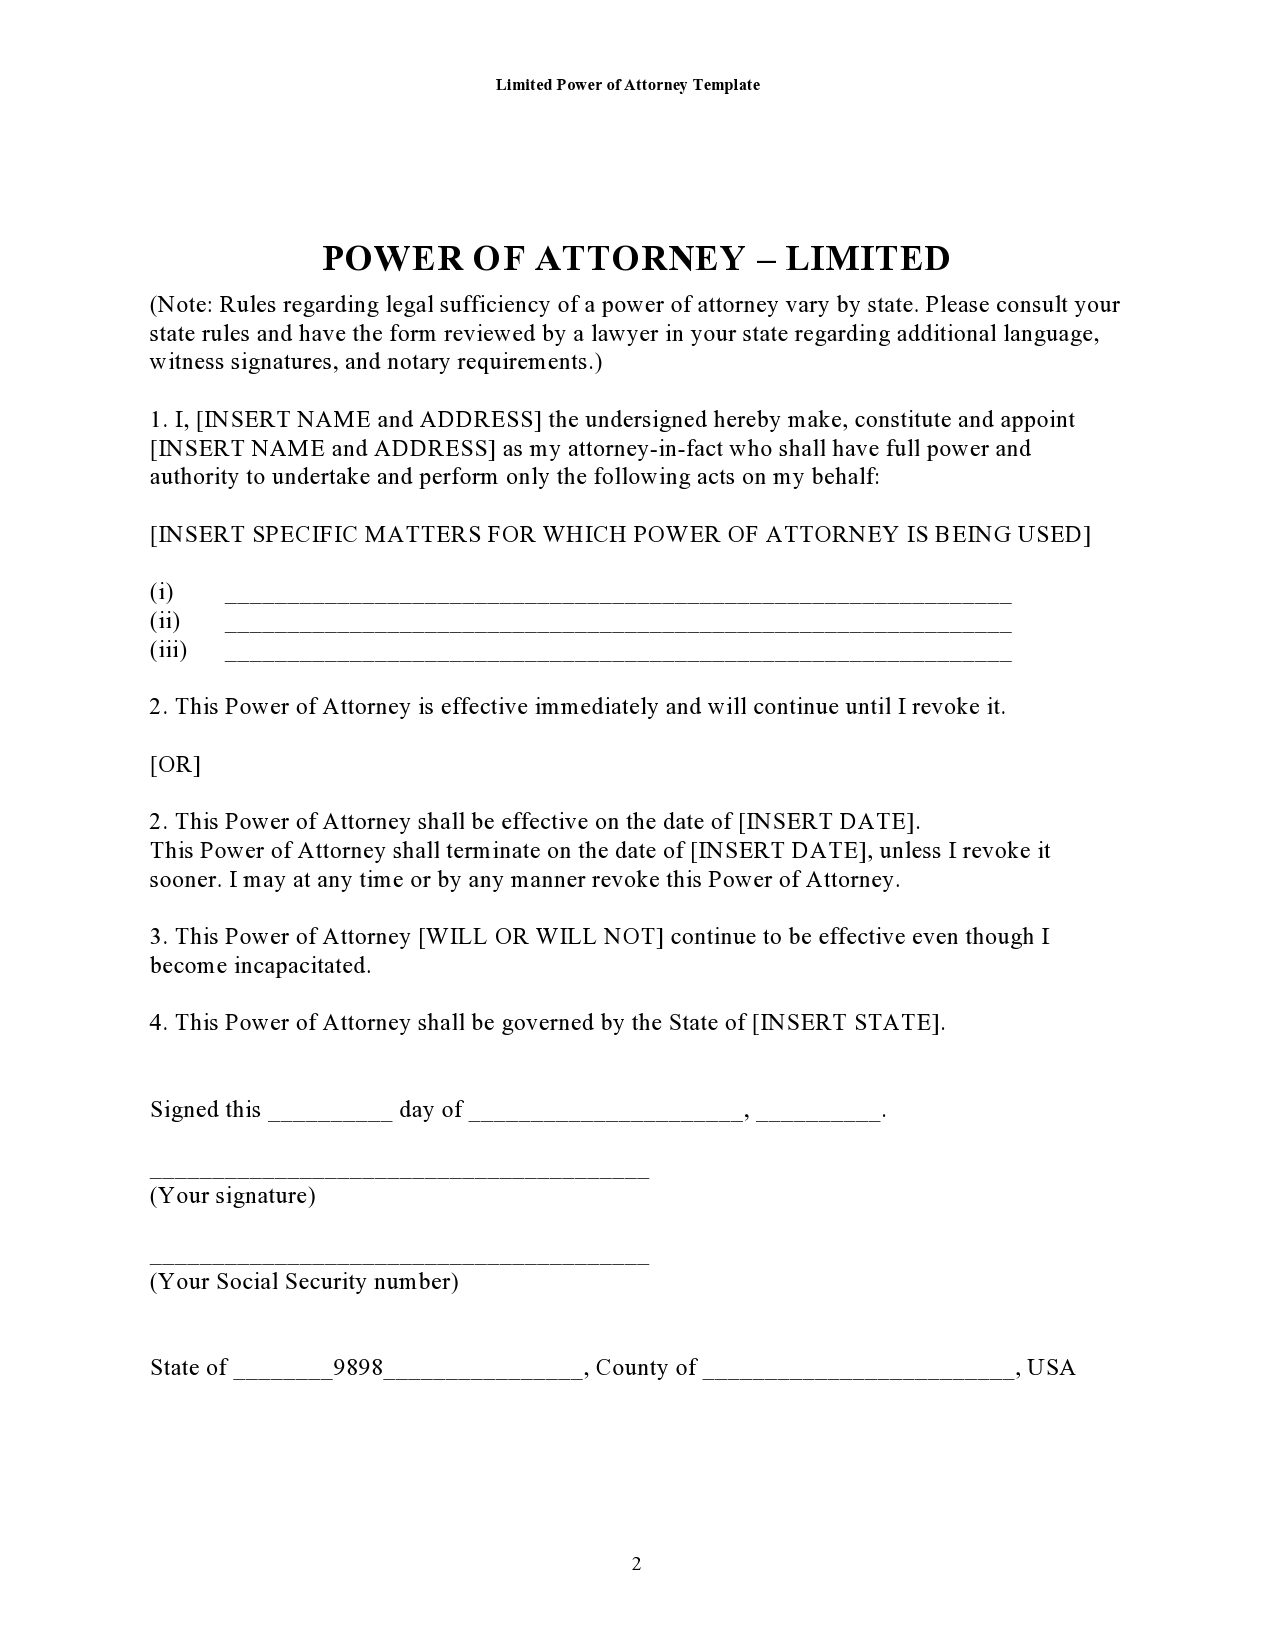 Free limited power of attorney 29